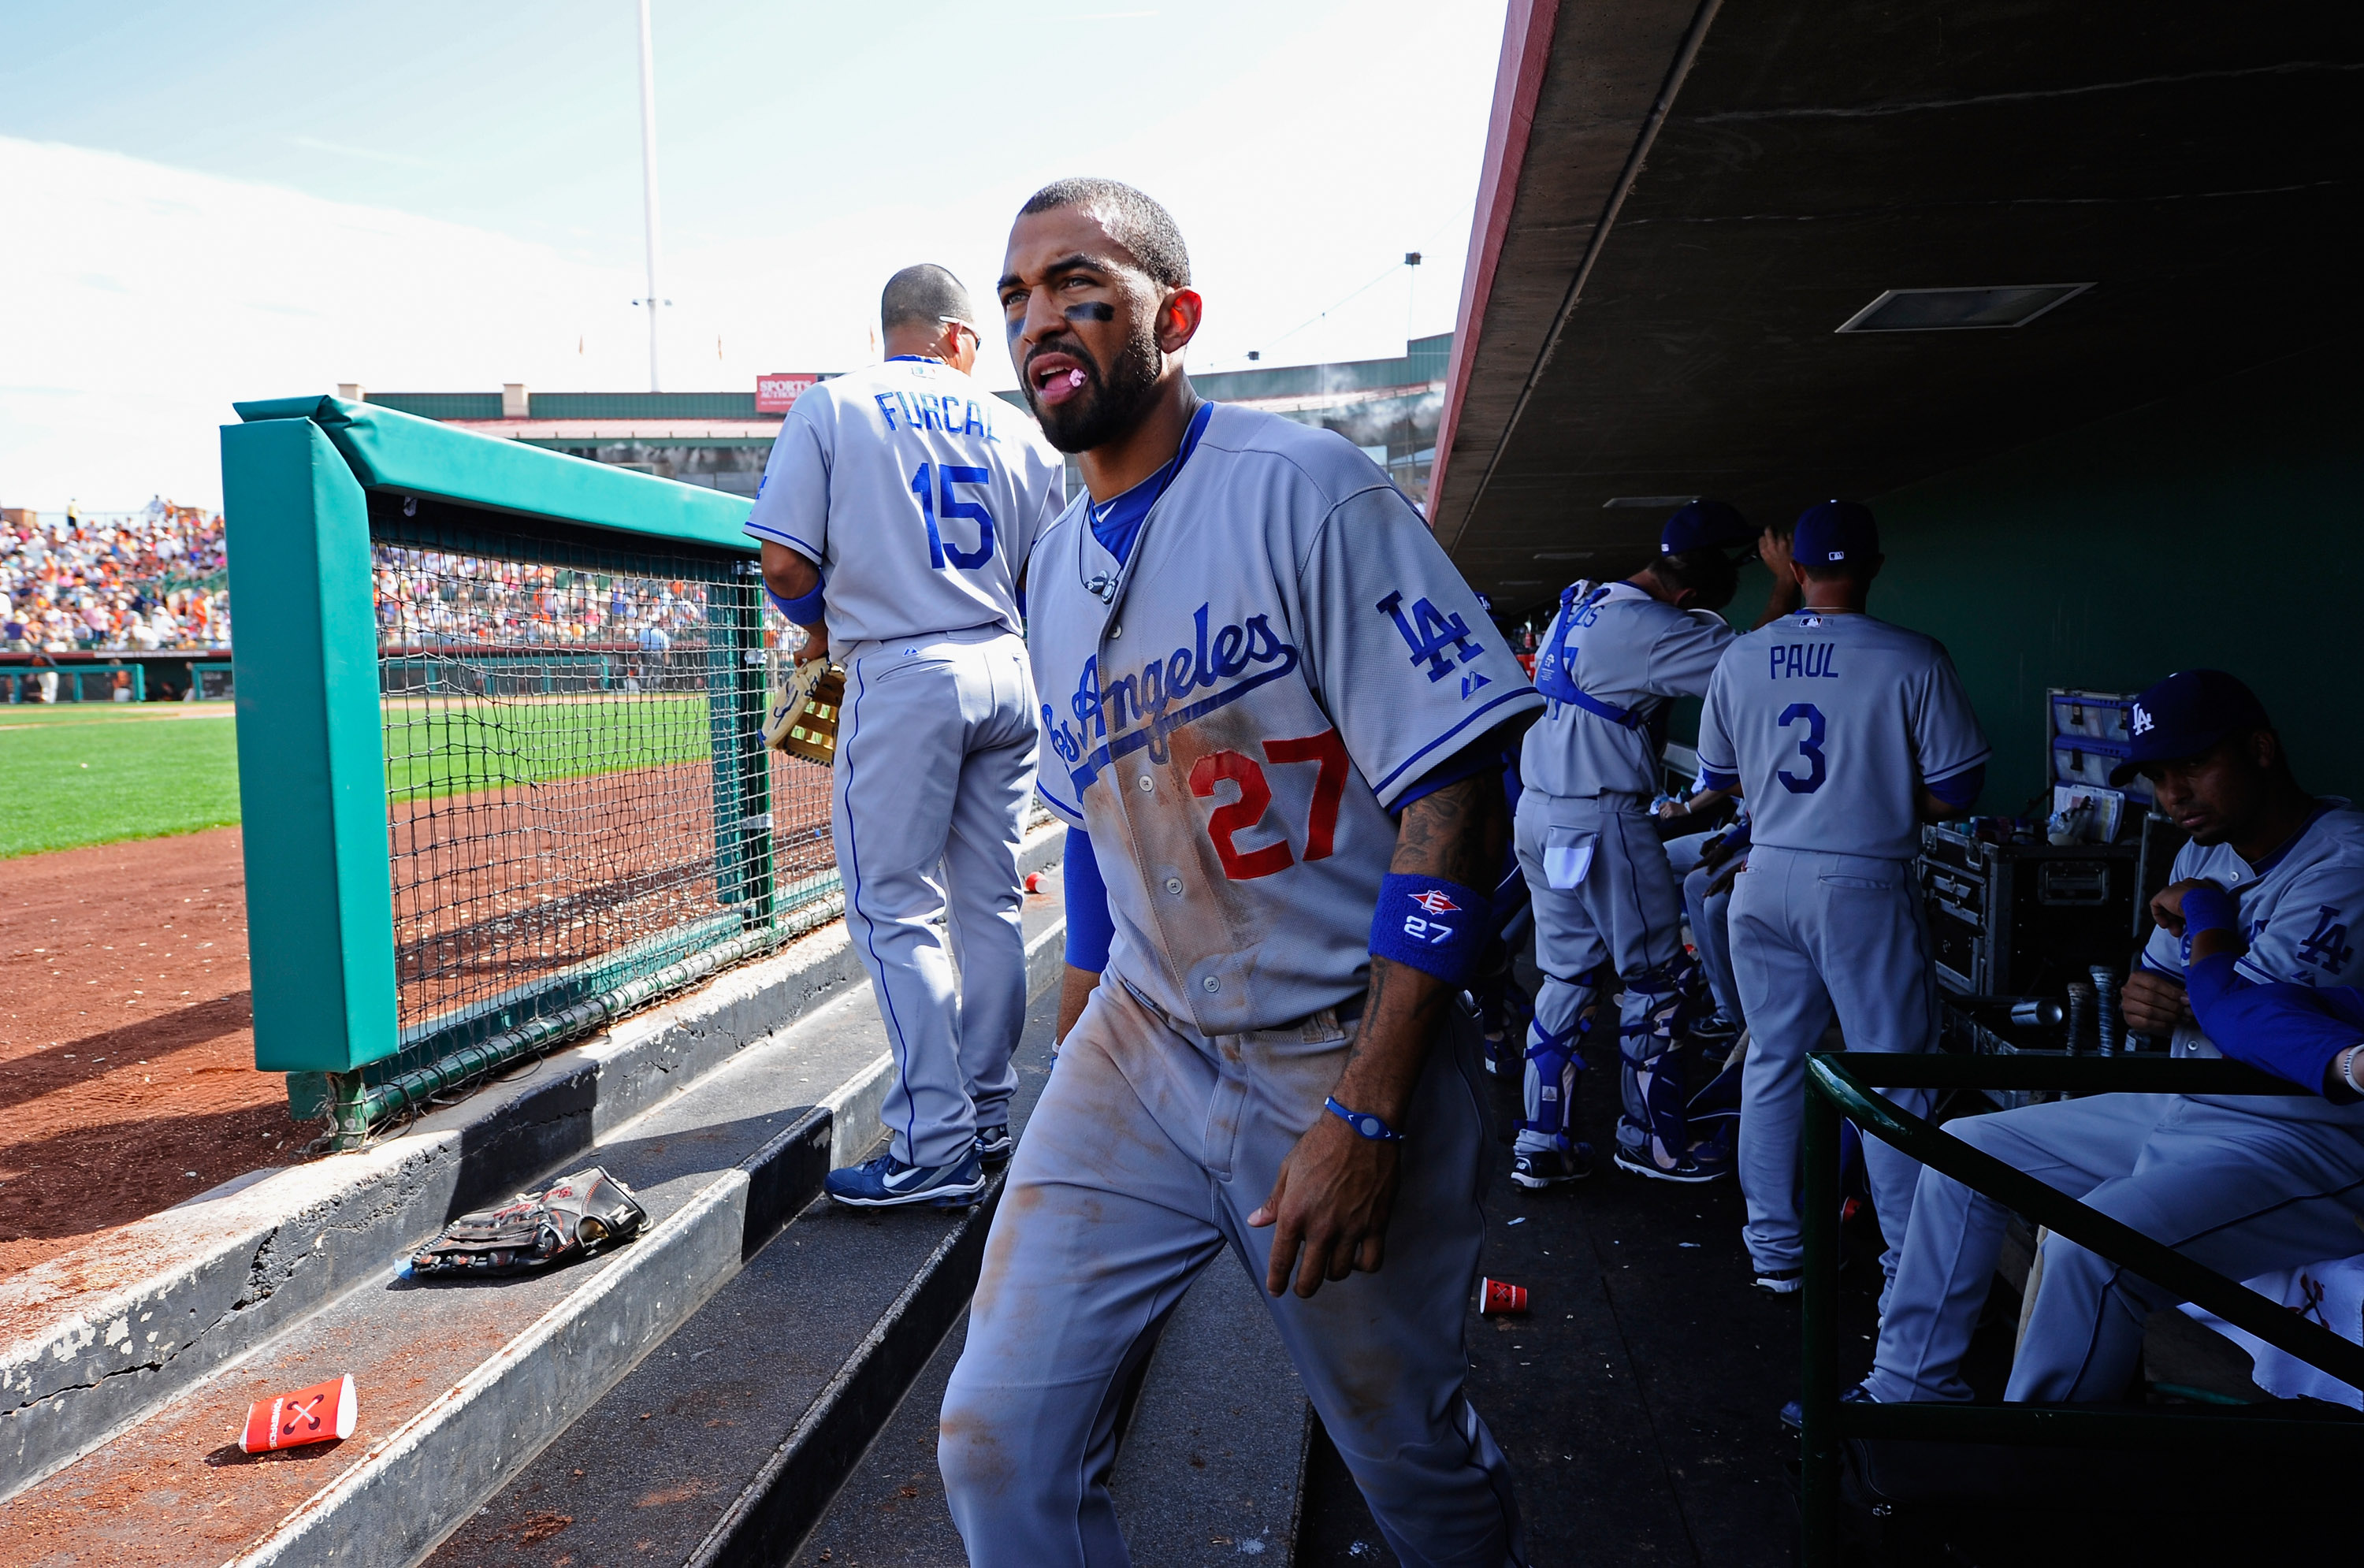 SCOTTSDALE, AZ - MARCH 18:  Matt Kemp #27 of the Los Angeles Dodgers walks out the dugout against the San Francisco Giants during the sixth inning of the baseball game at Scottsdale Stadium on March 18, 2011 in Scottsdale, Arizona.  (Photo by Kevork Djans